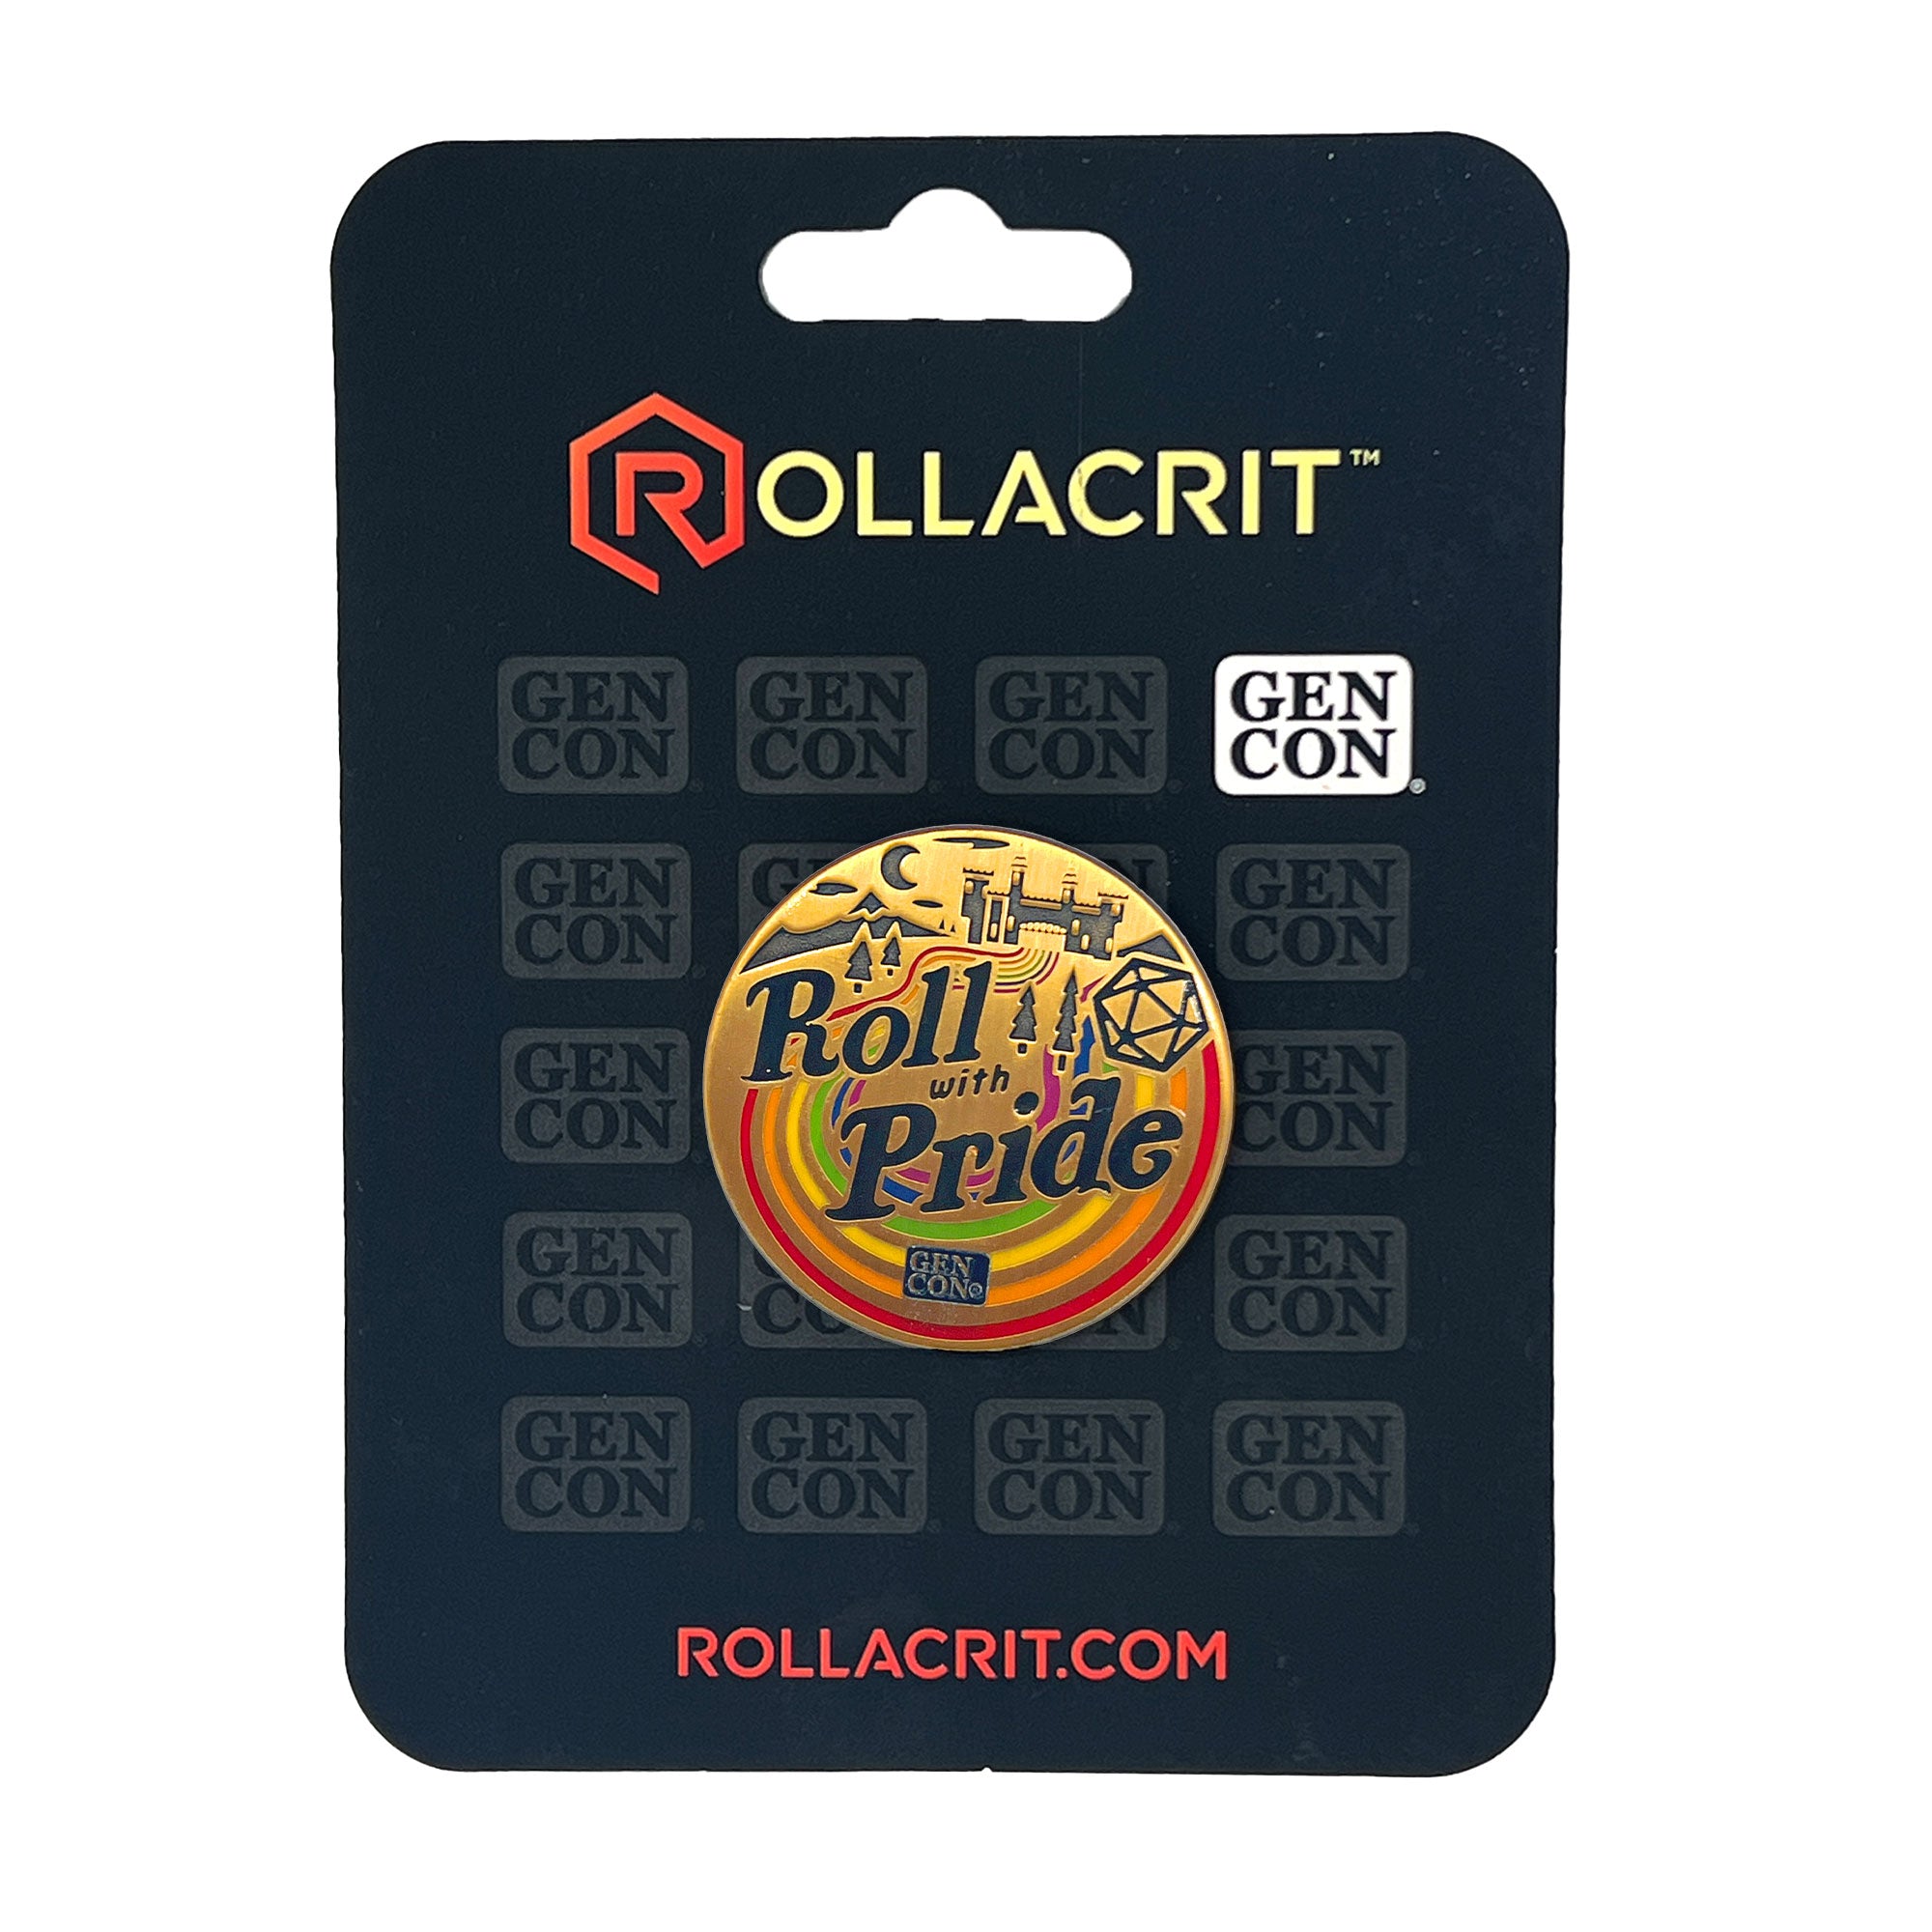 Gen Con Roll With Pride Pin | Rollacrit